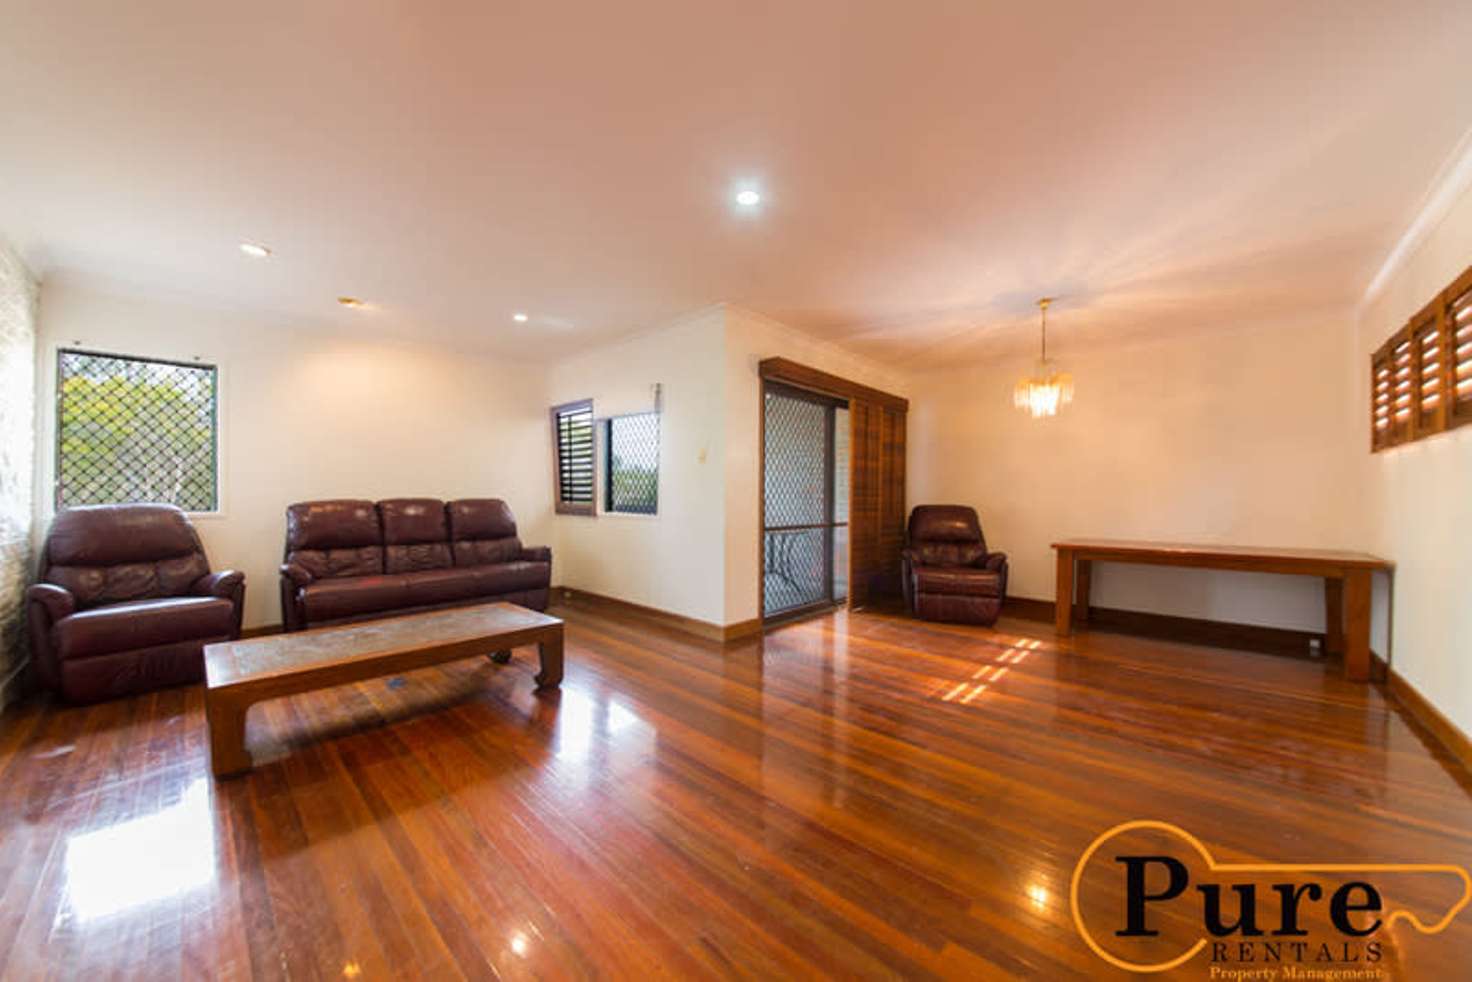 Main view of Homely house listing, 2 Redbourne Street, Chermside West QLD 4032